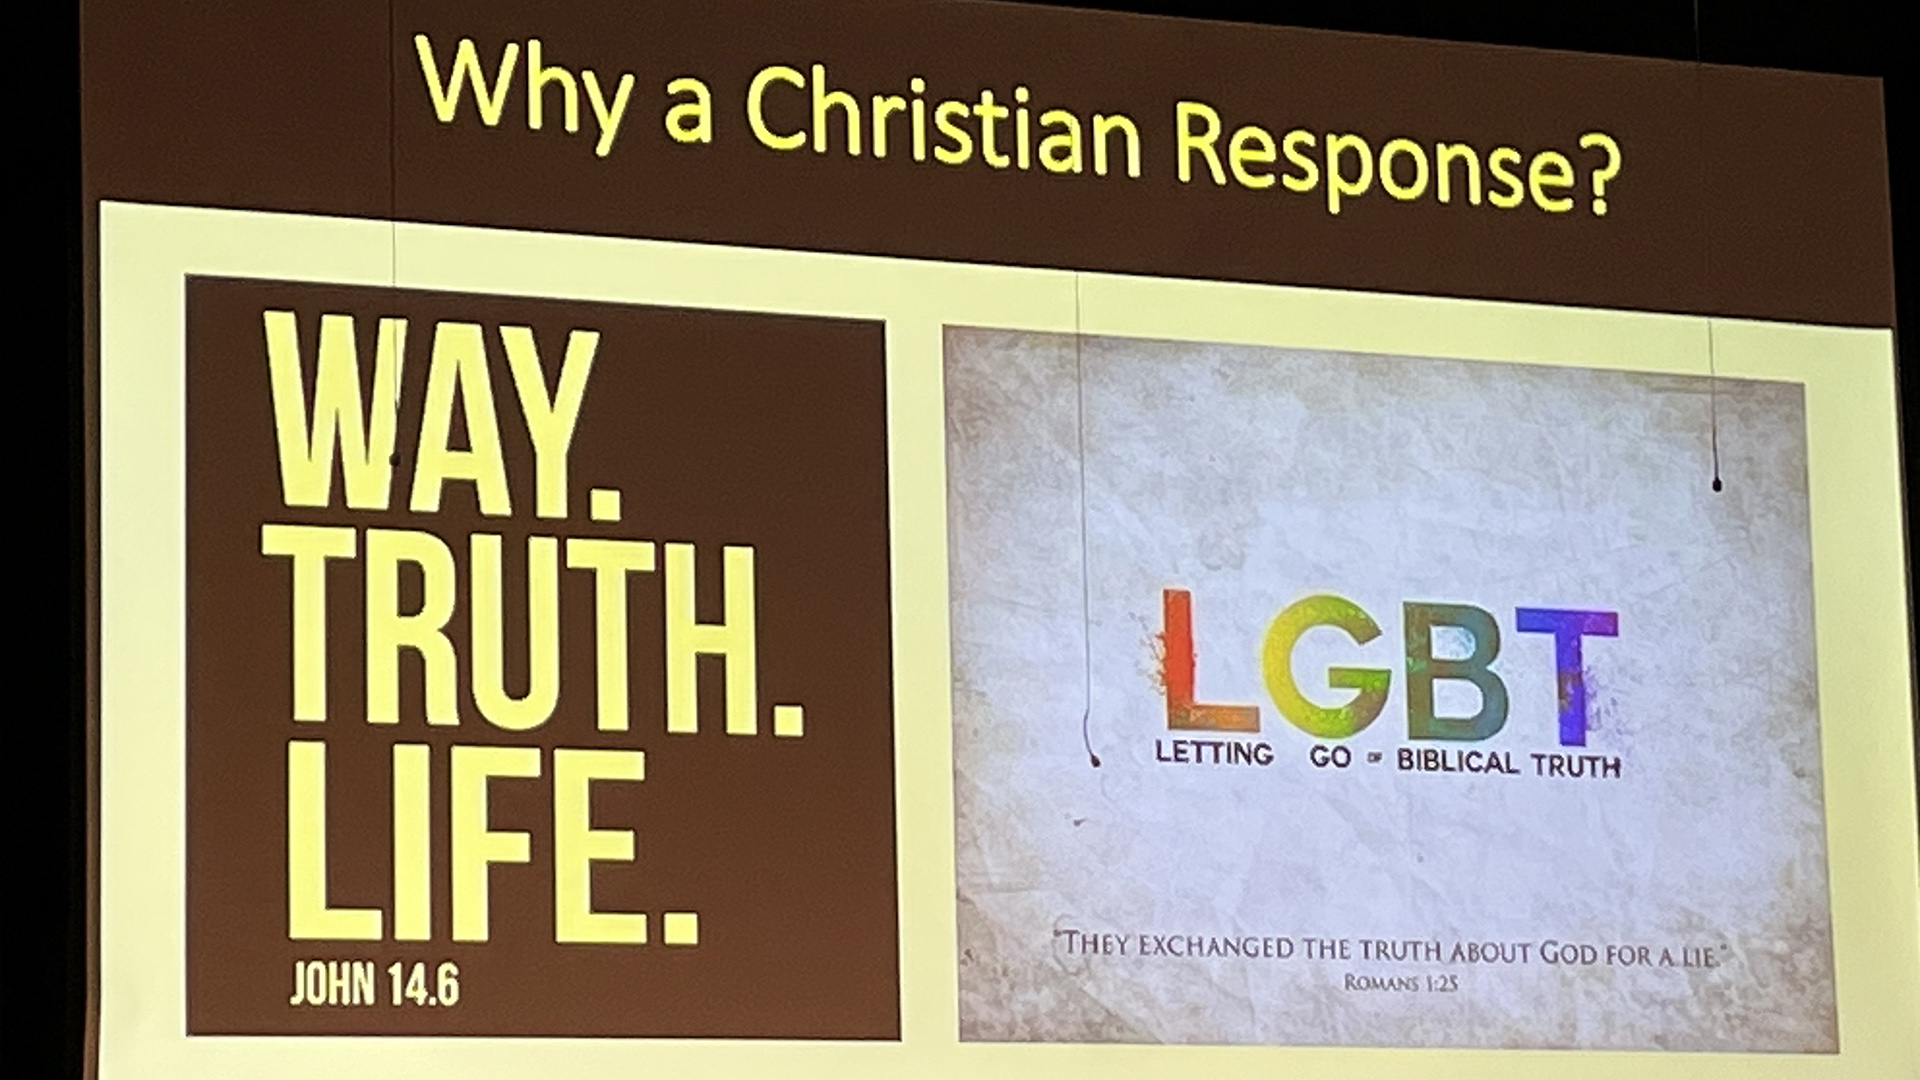 A presentation slide projected on a large screen shows the title "Why a Christian Response?," a graphic with the words "Way. Truth. Life. John 14.6," and a graphic with the words "LGBT Letting Go Biblical Truth" and "They Exchanged The Truth About Got For A Lie Romans 1:25."